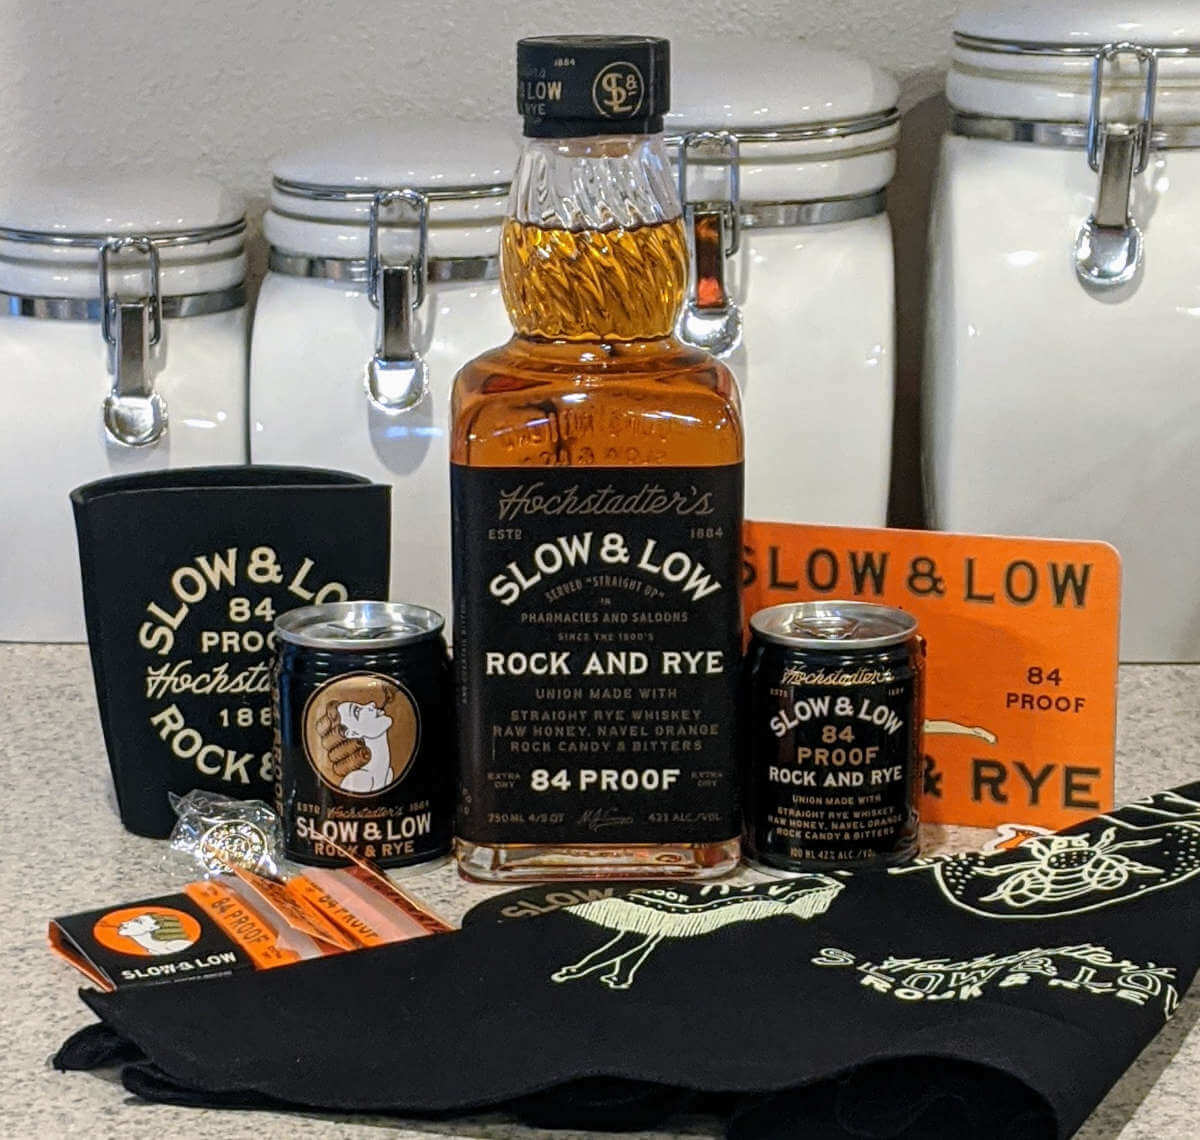 Review: Hochstadter’s Slow & Low Rock and Rye cocktail, paired with beers